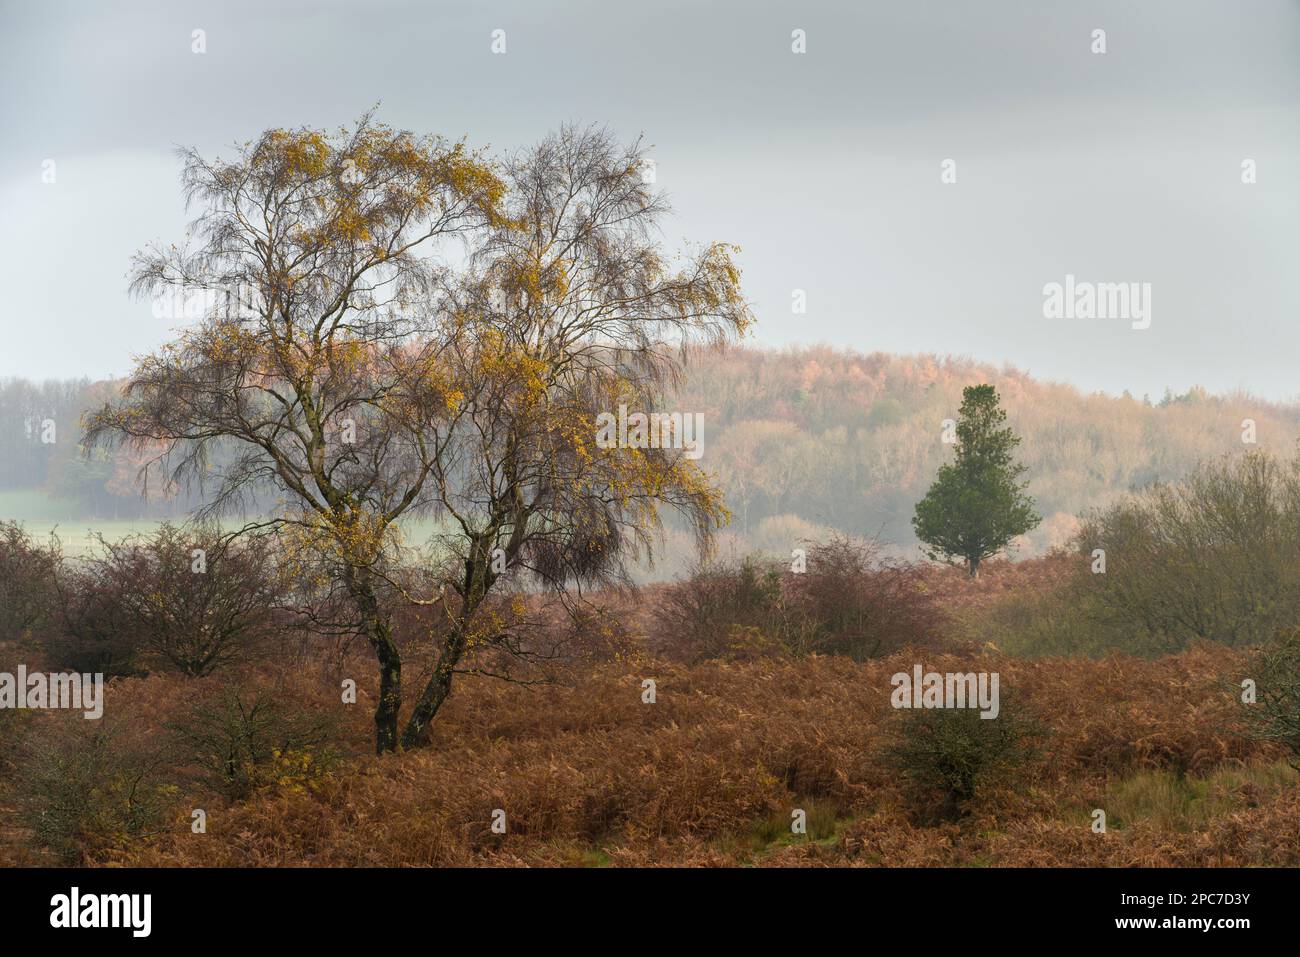 An autumn morning at Back Down in the Mendip Hills Area of Outstanding Natural Beauty, Somerset, England. Stock Photo